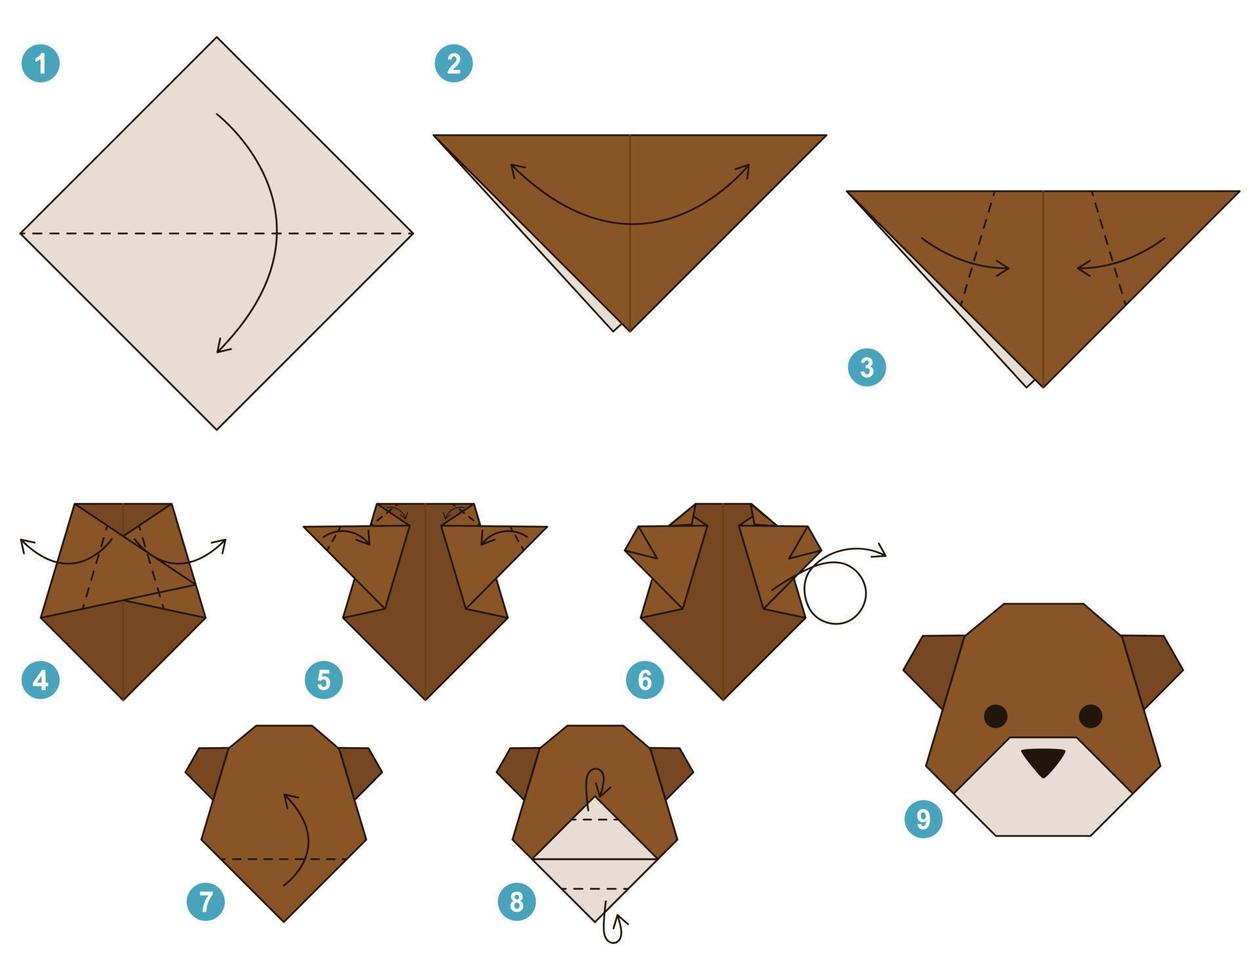 Bear origami scheme tutorial moving model. Origami for kids. Step by step how to make a cute origami bear. Vector illustration.